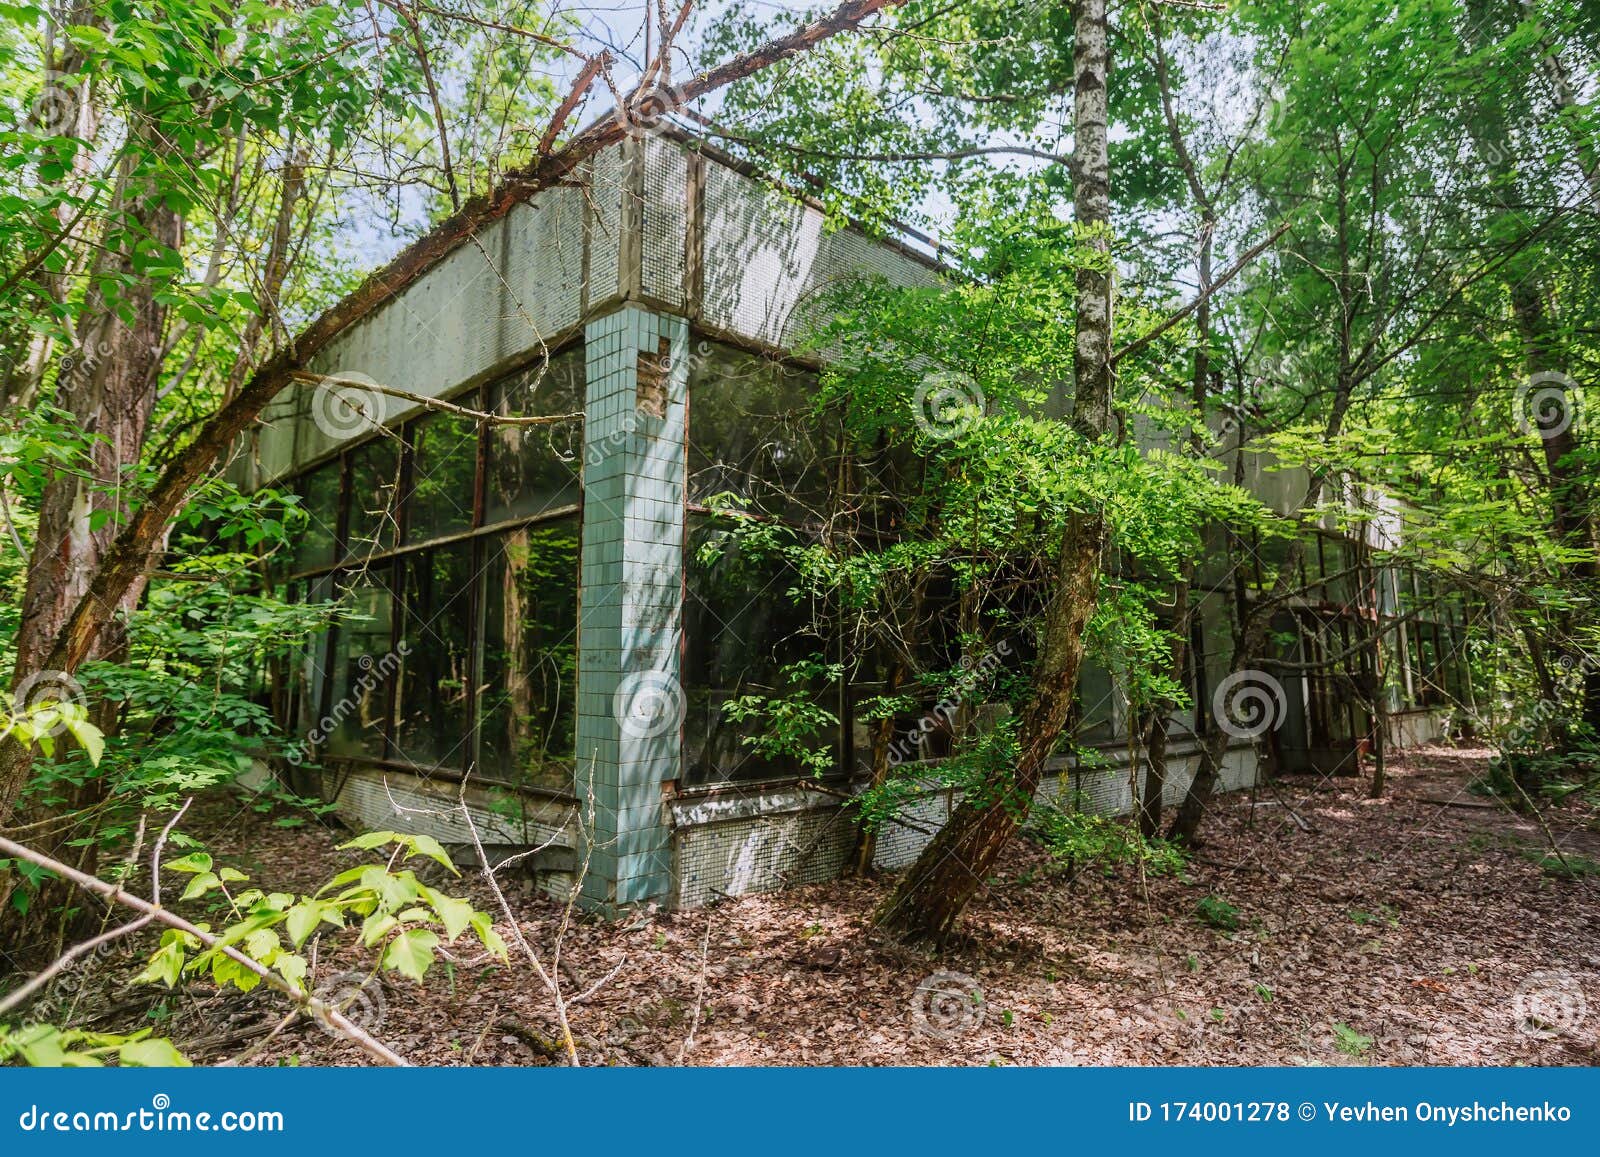 abandoned shop in ghost town pripyat chornobyl zone